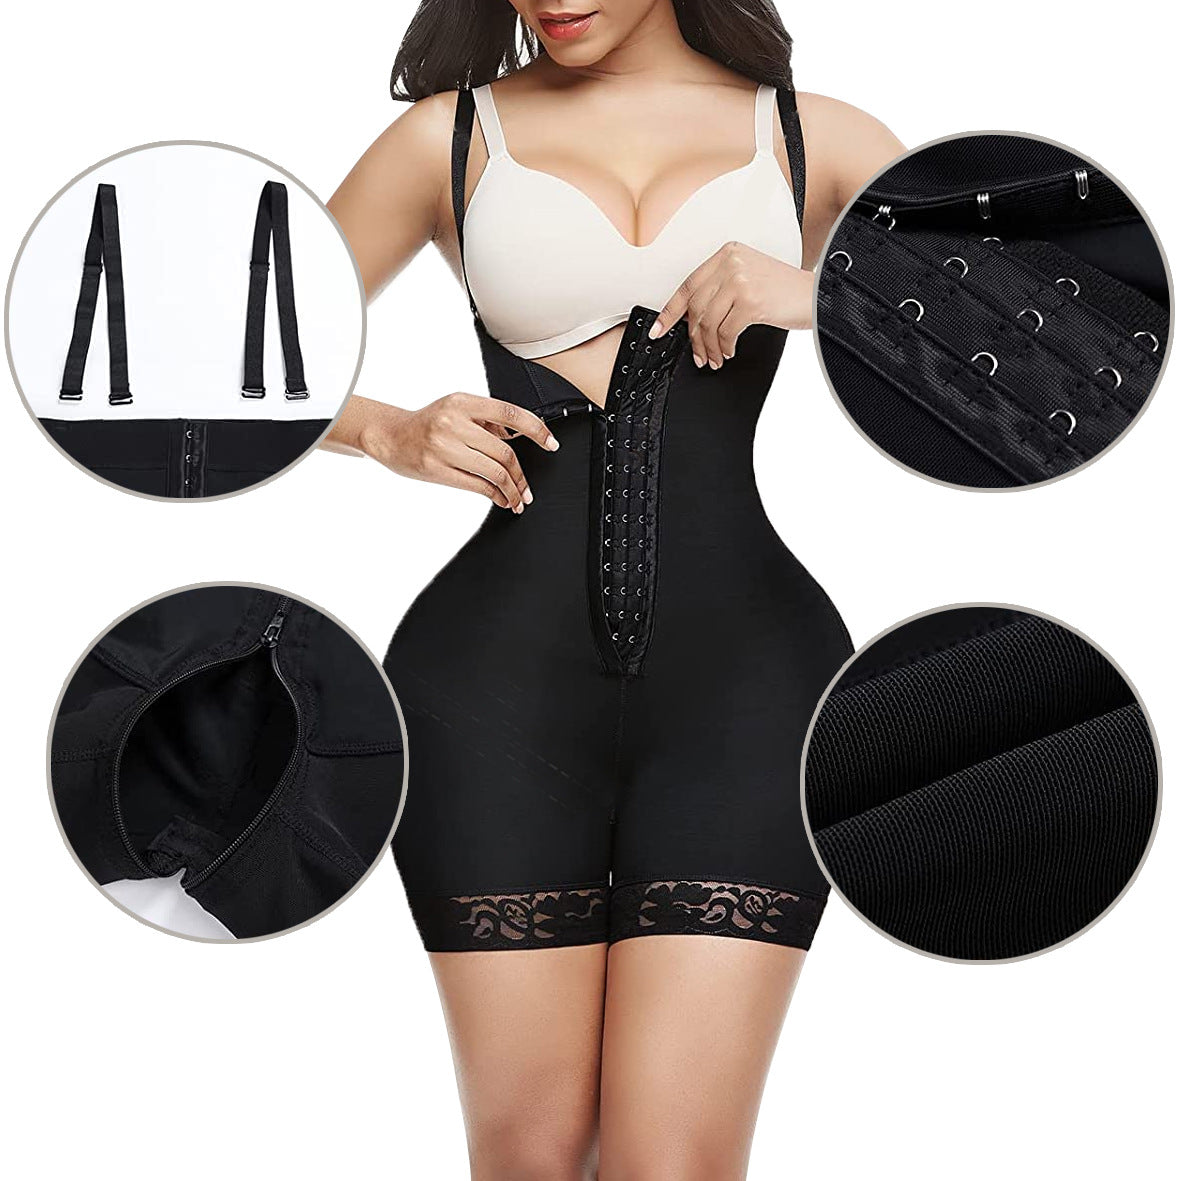 Plus Size Body Shaper Vest for Waist and Hip Control